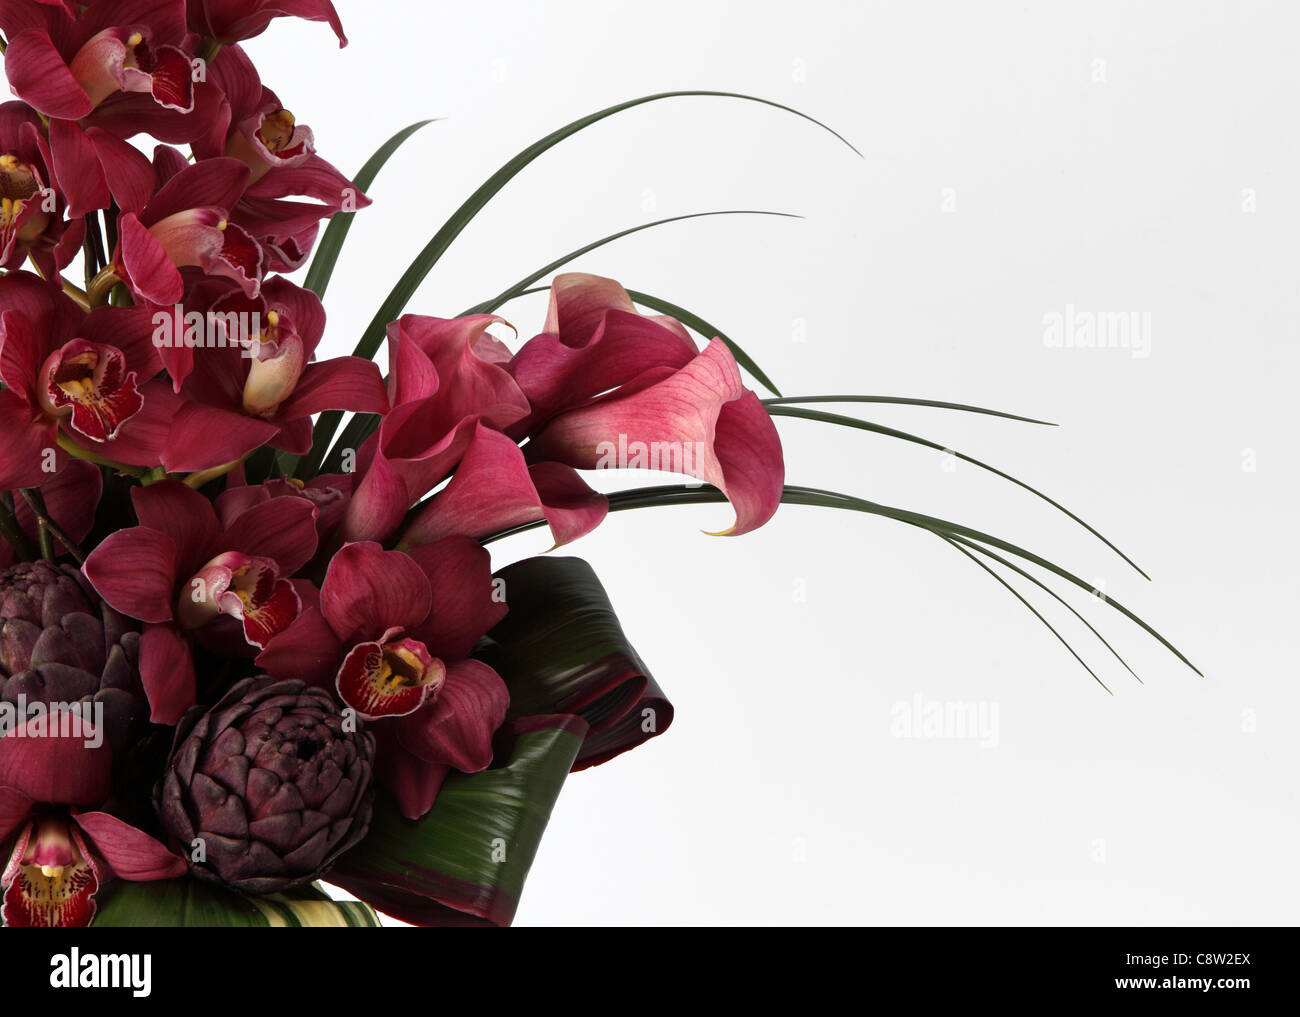 A close-up of a colorful bouquet of flowers. Spray of red cymbidium orchids, two purple proteas Stock Photo